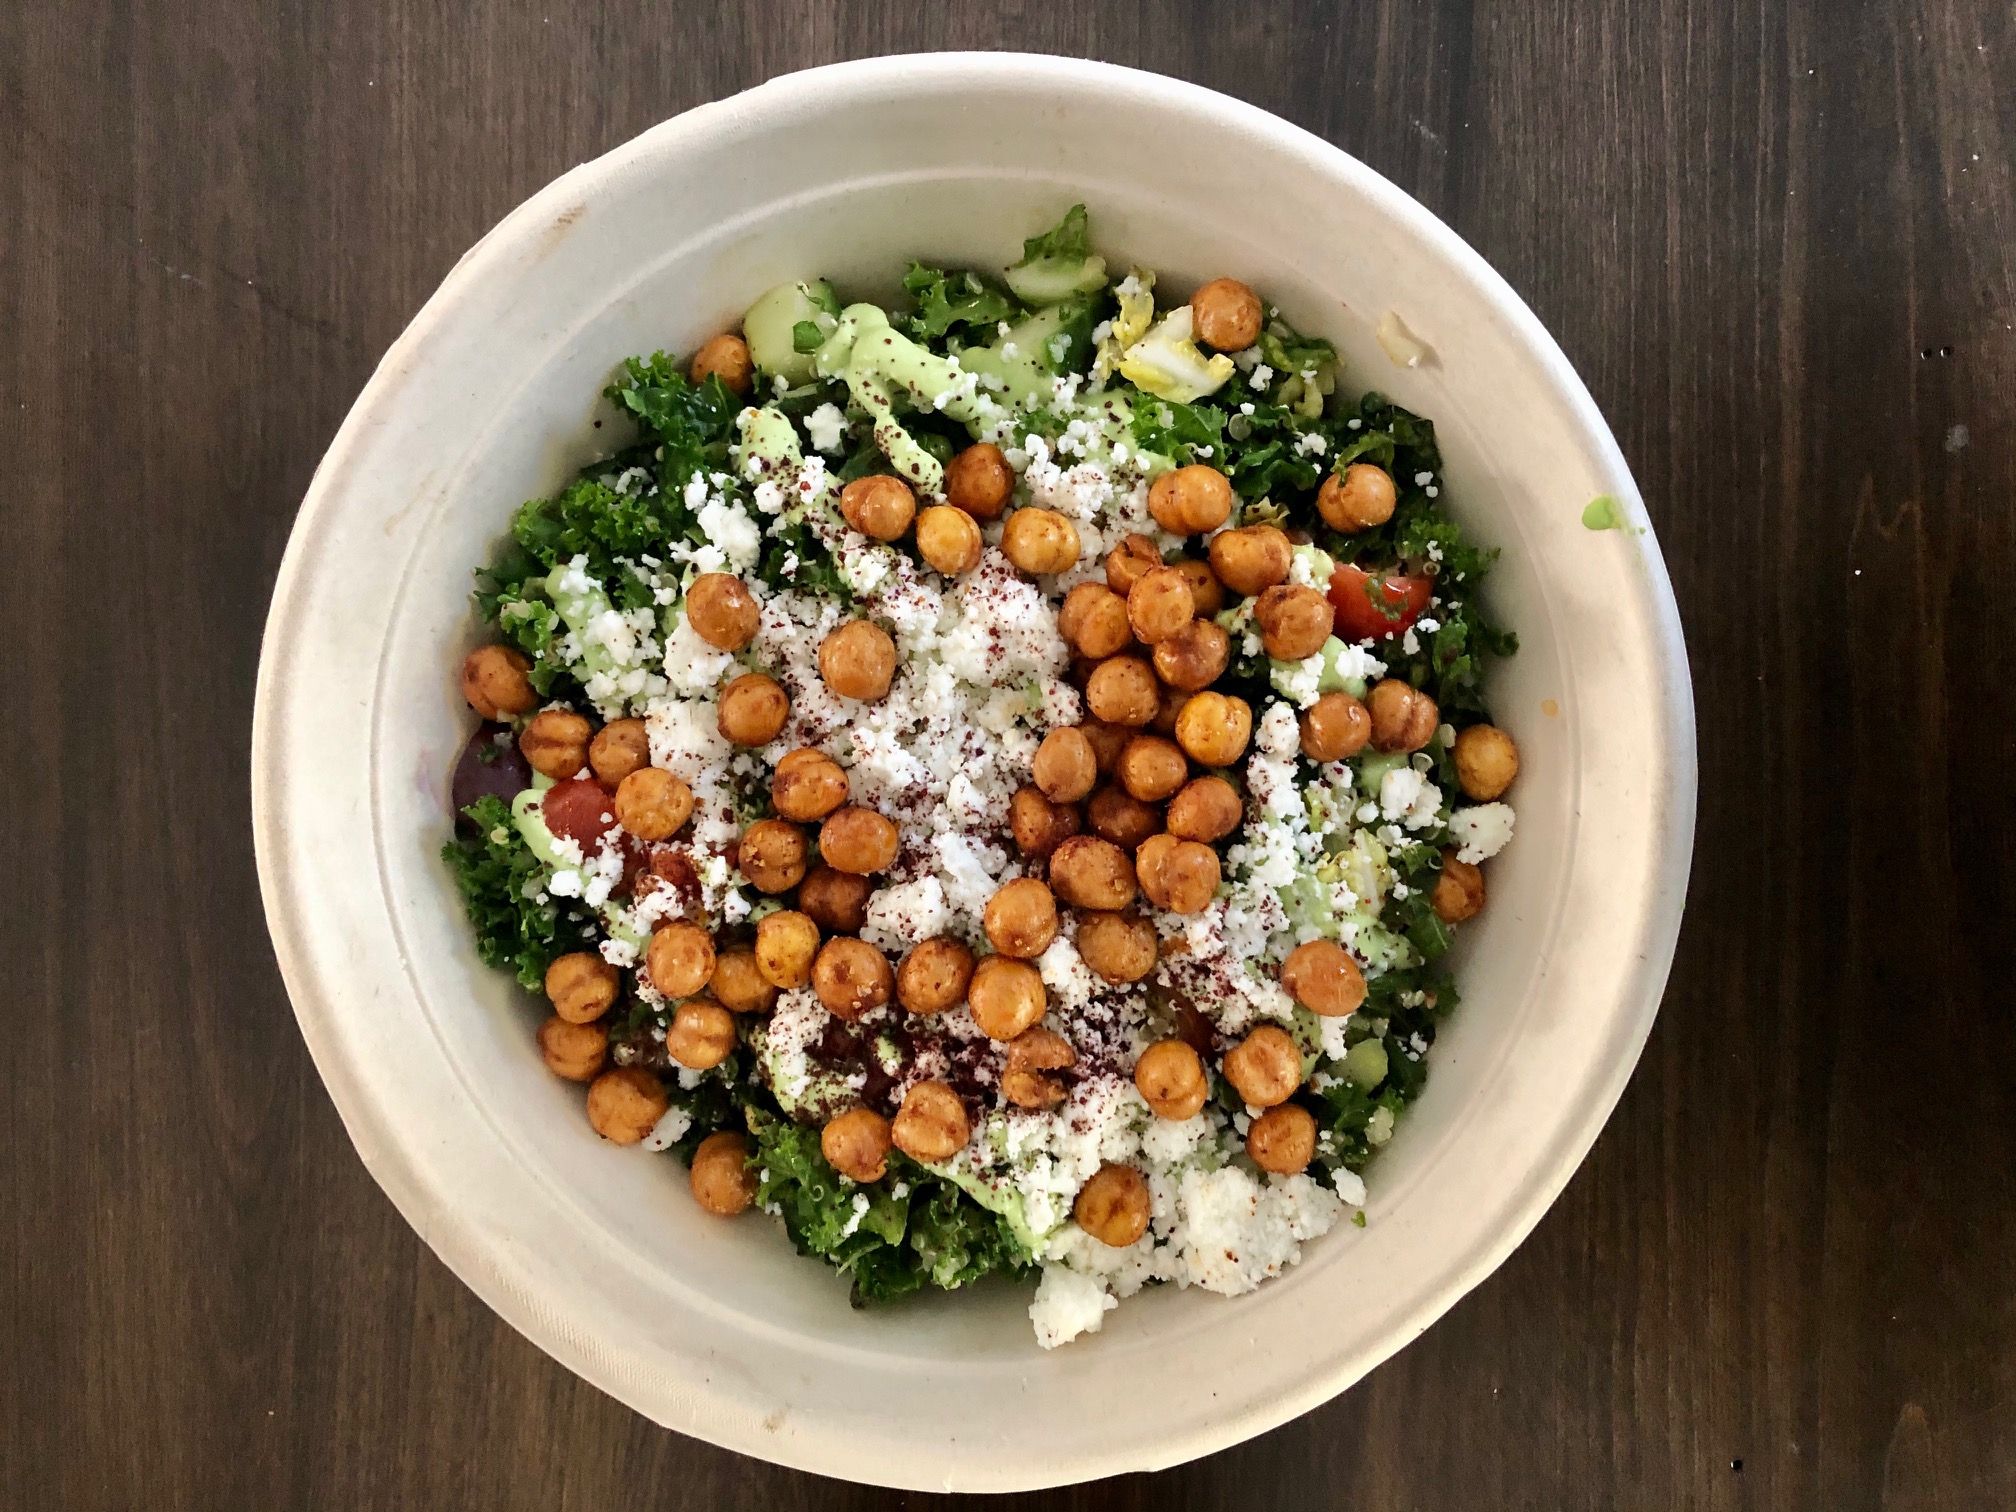 Madame Marie’s Weekly Roundup: Toronto’s Best Takeout and Delivery During COVID-19 – May 7, 2020